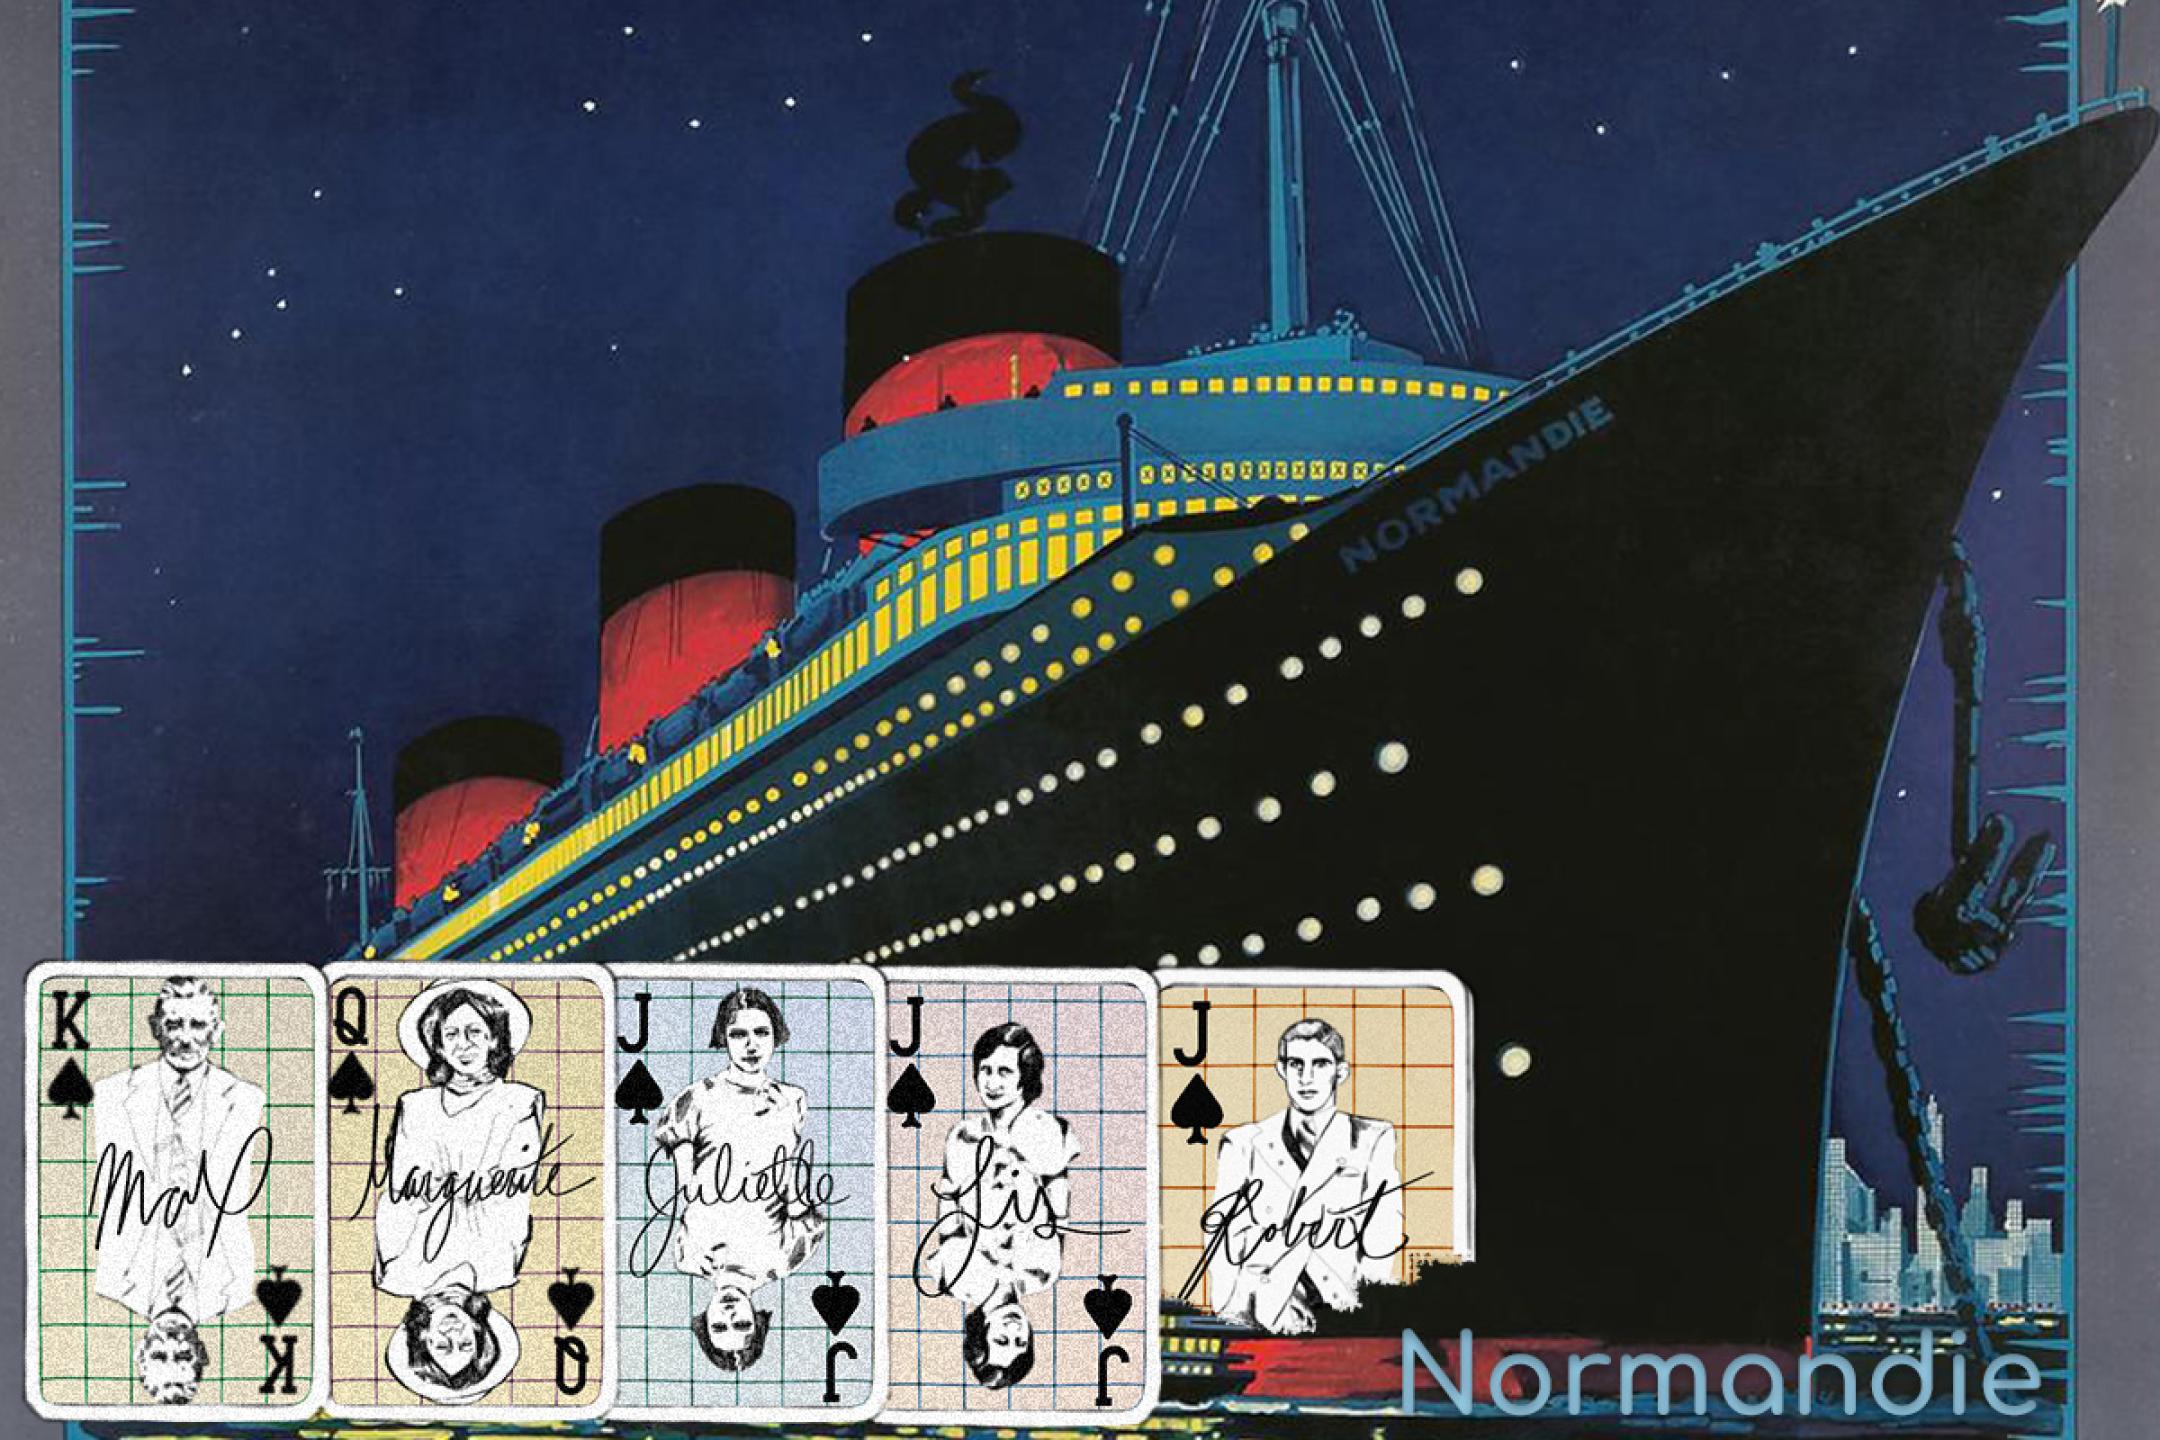 A collage: in the background a postcard of a historic cruise ship in front of a big city skyline. In front below five playing cards with king, queen and three jacks.